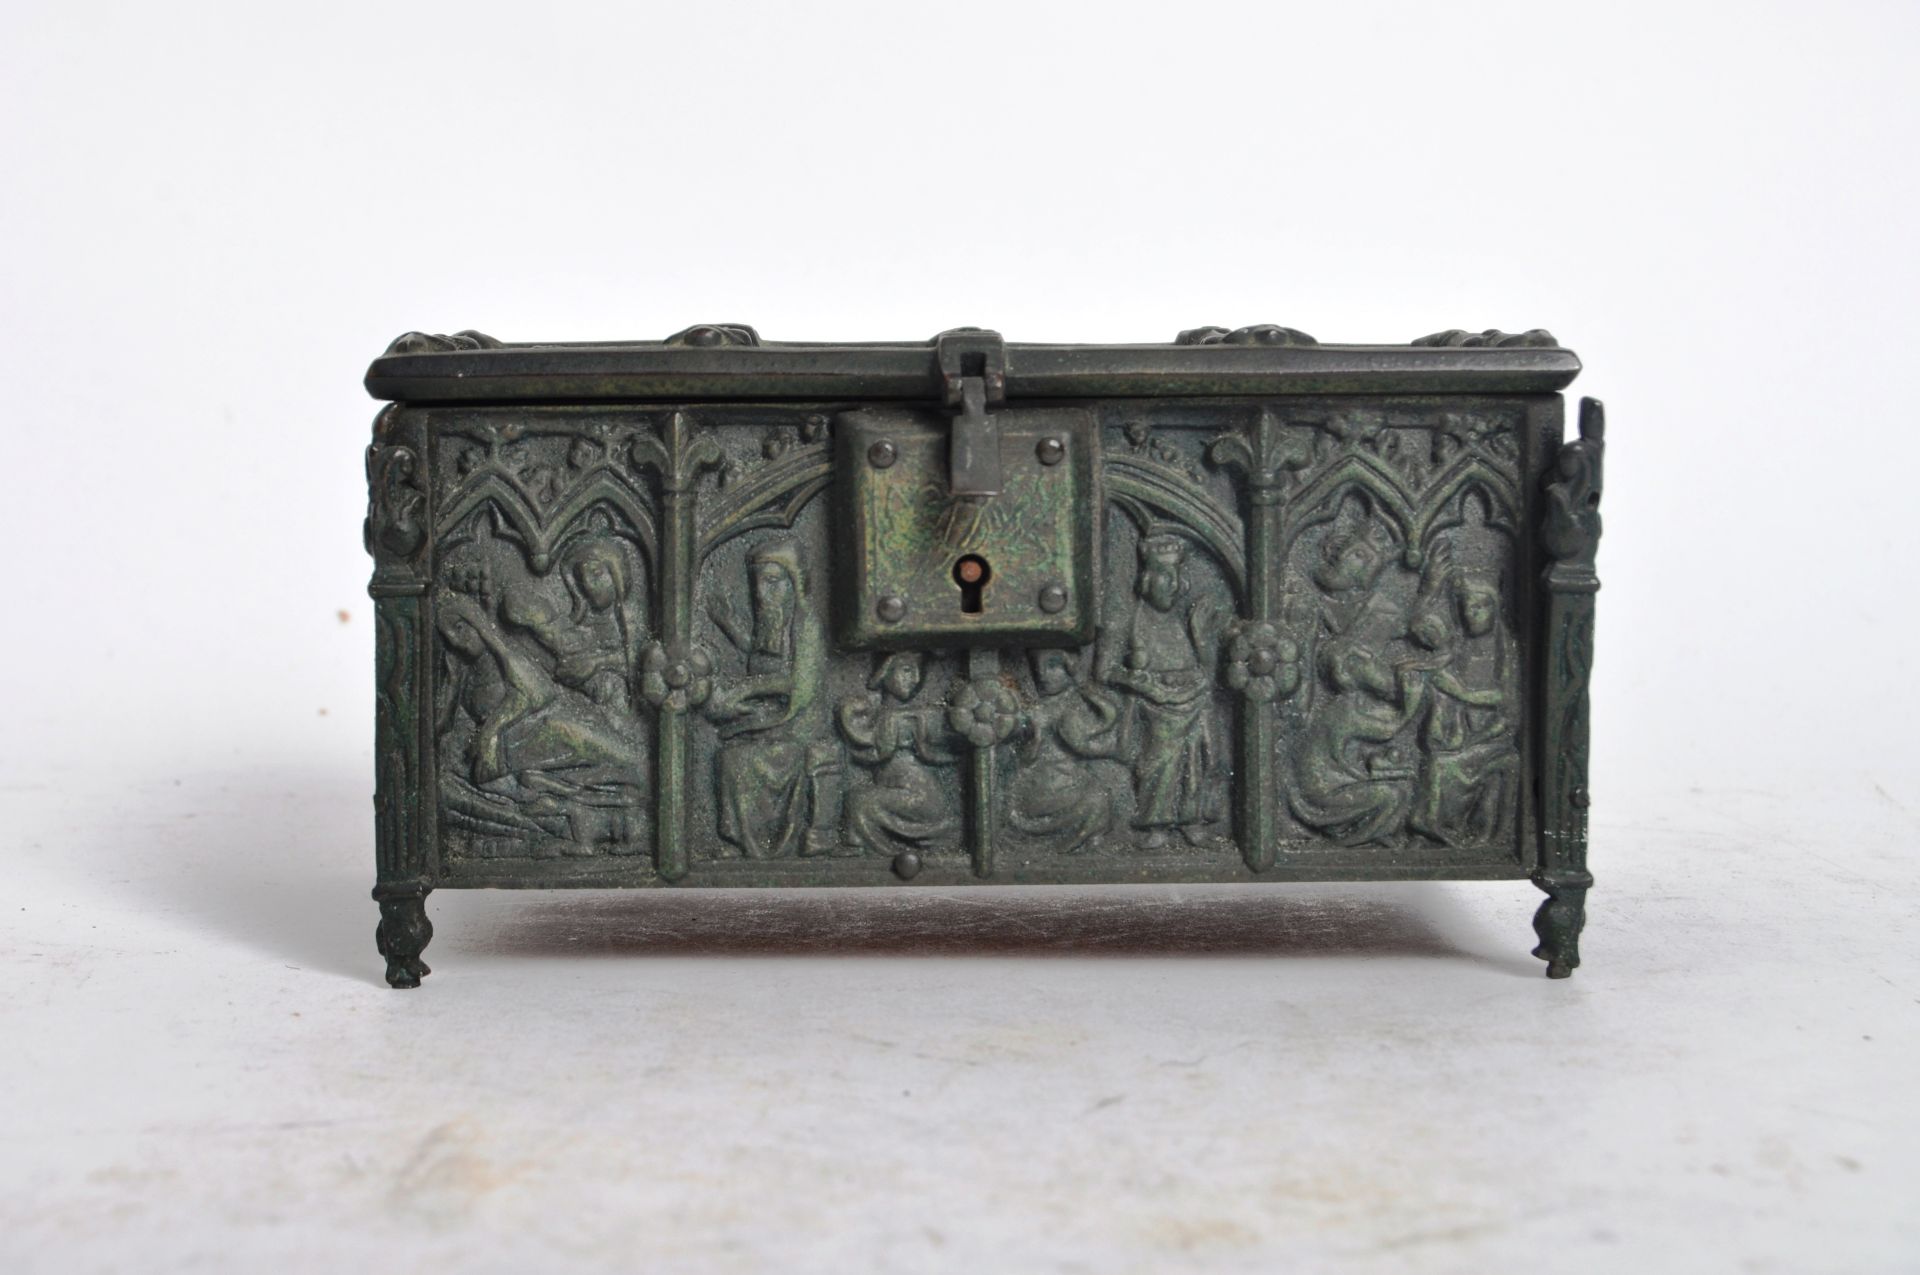 SMALL NINETEENTH CENTURY BRONZE CASKET WITH GOTHIC INLAY - Image 2 of 7